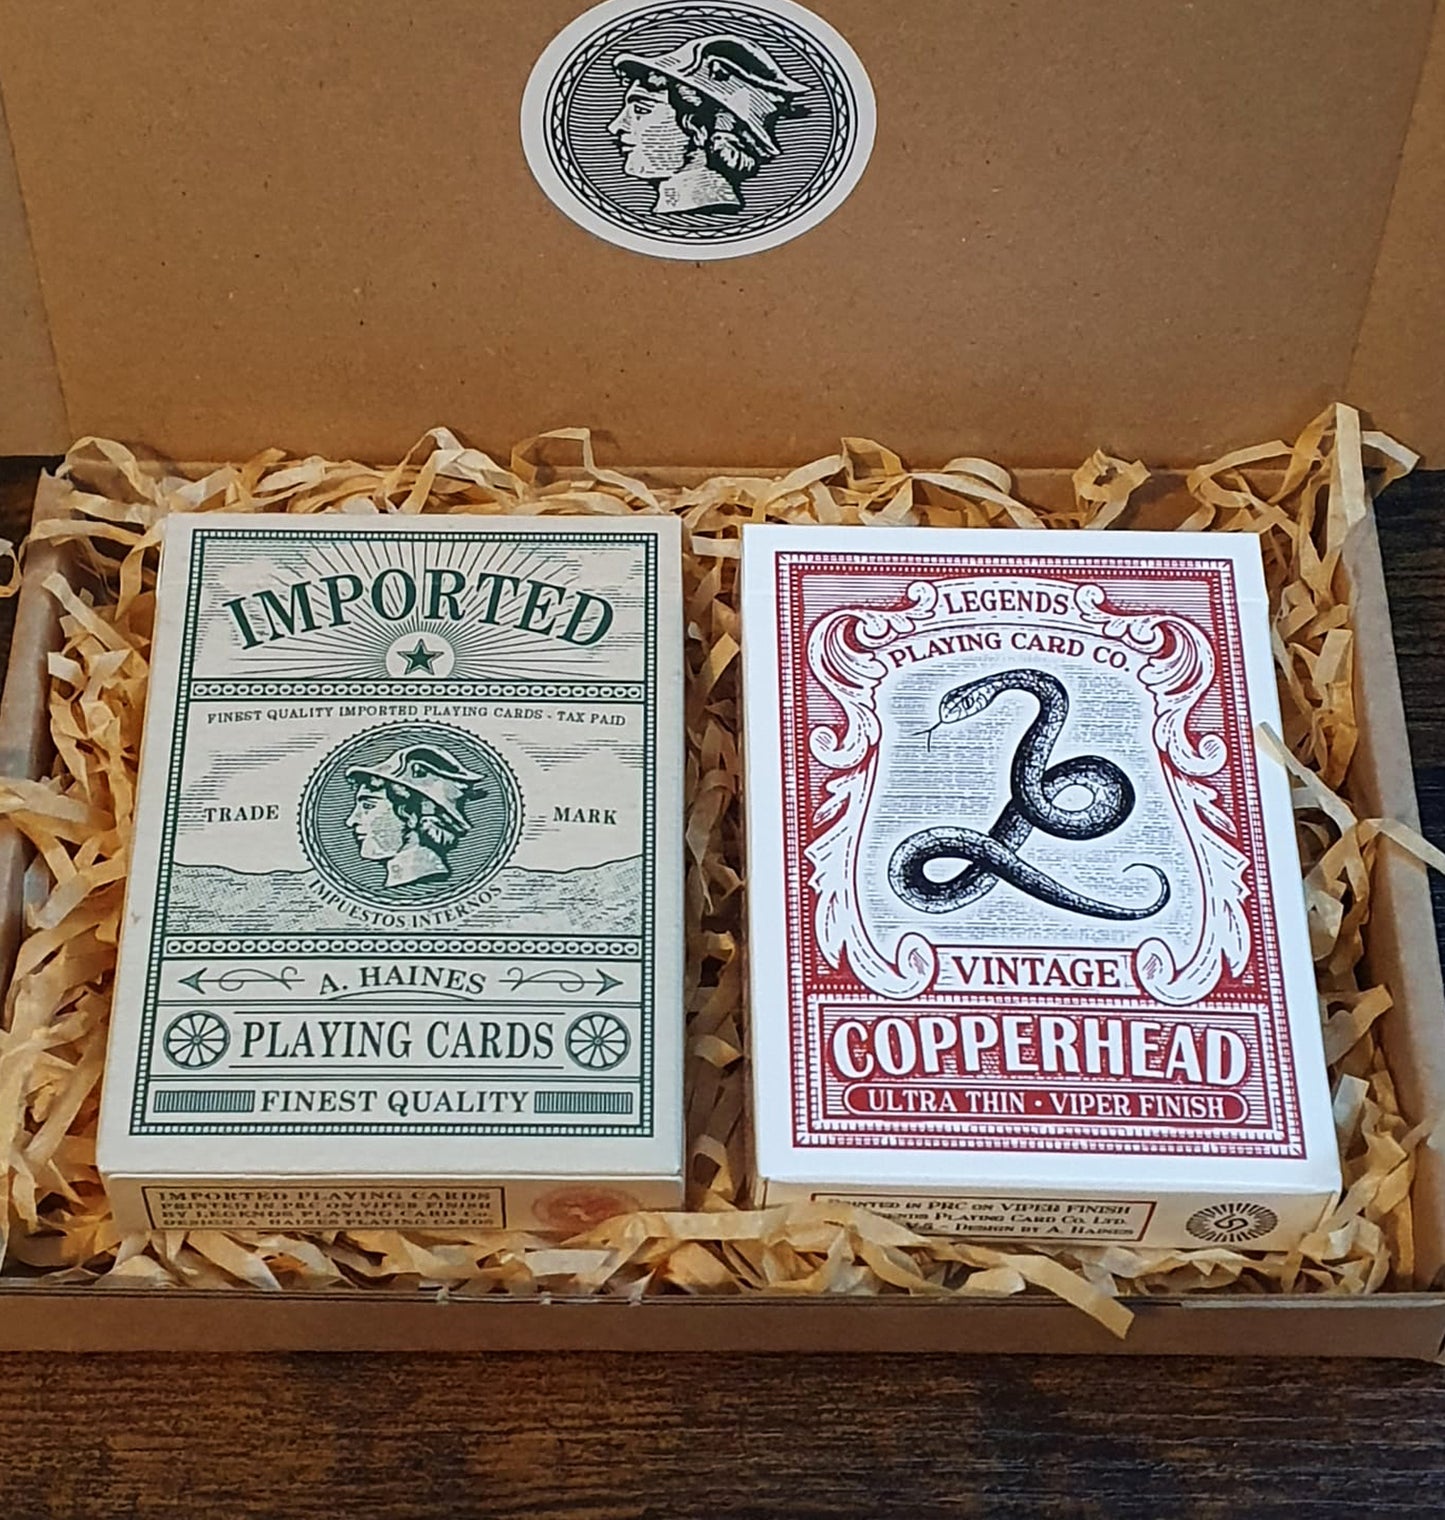 DOUBLE BOX - 1x IMPORTED & 1x COPPERHEAD 2023 PLAYING CARDS - BOTH SIGNED BY THE ARTIST